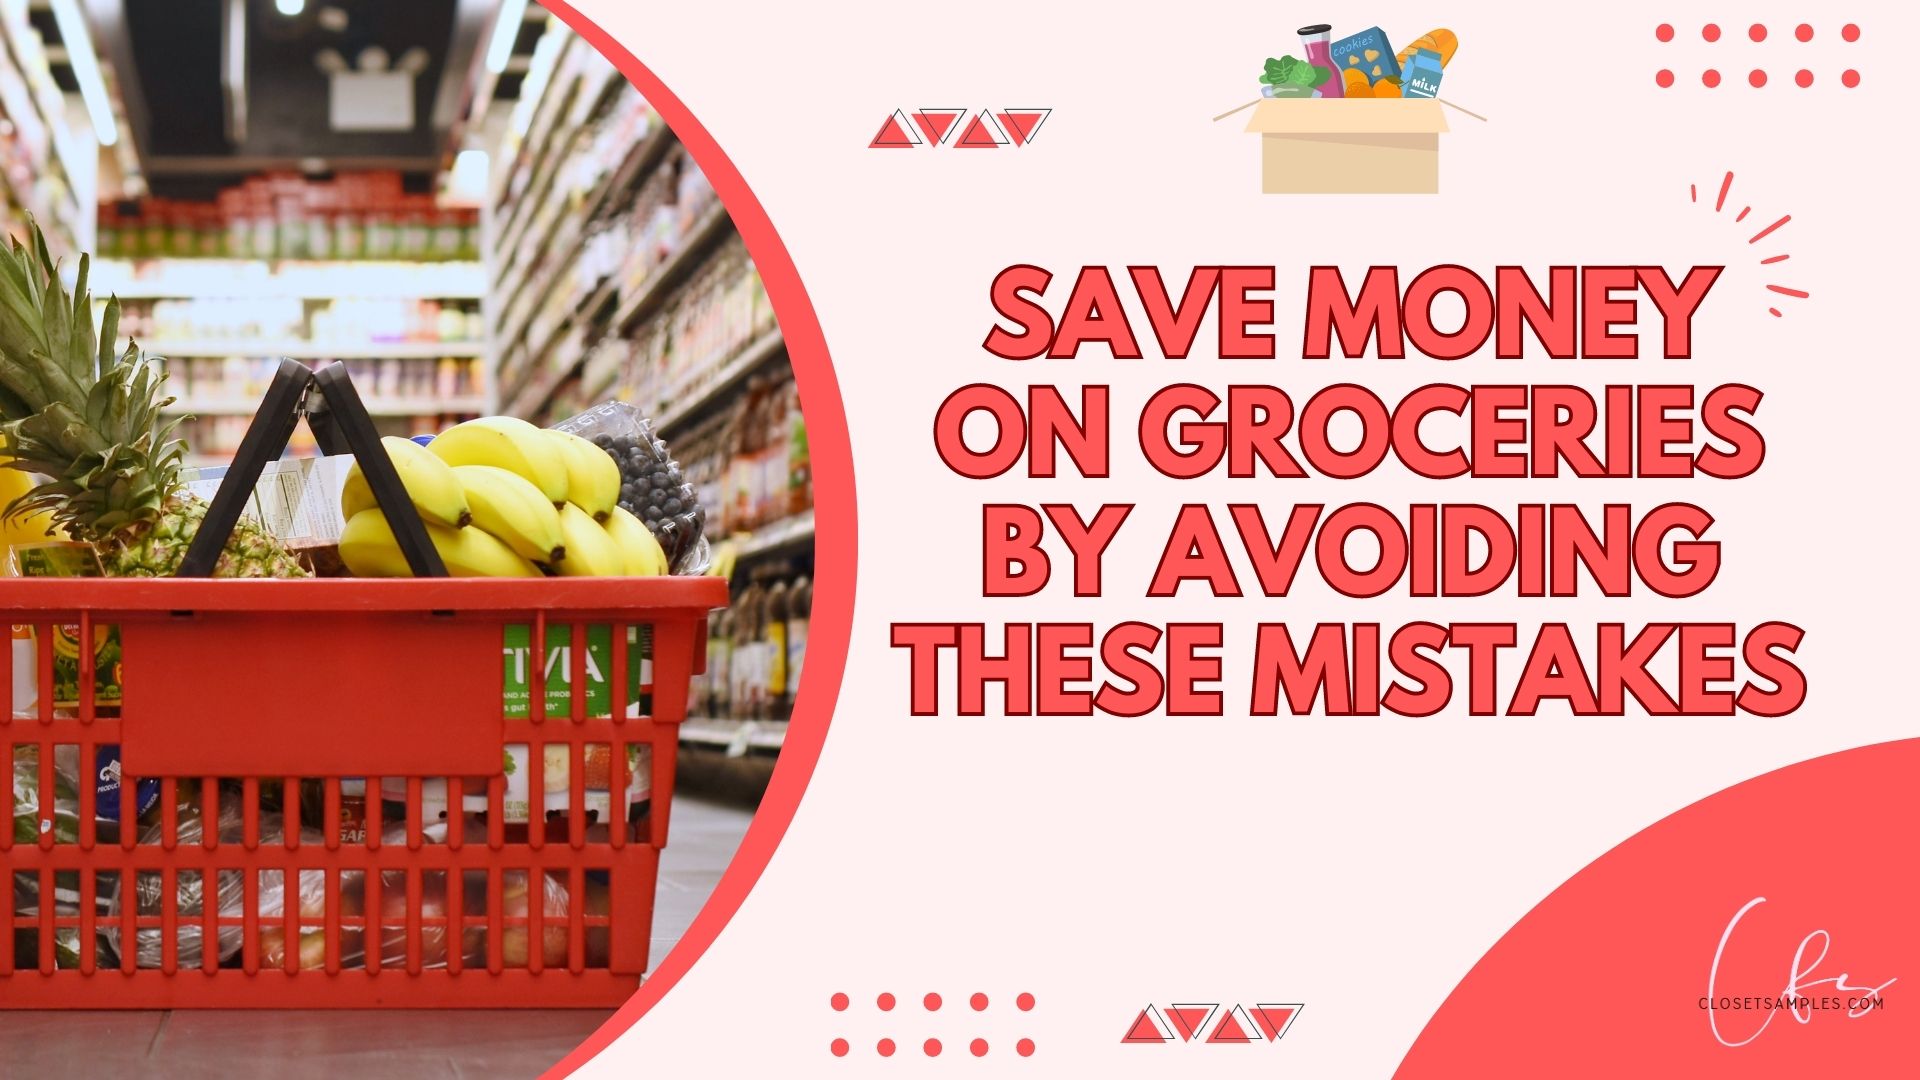 Save Money on Groceries by Avoiding These Mistakes closetysamples